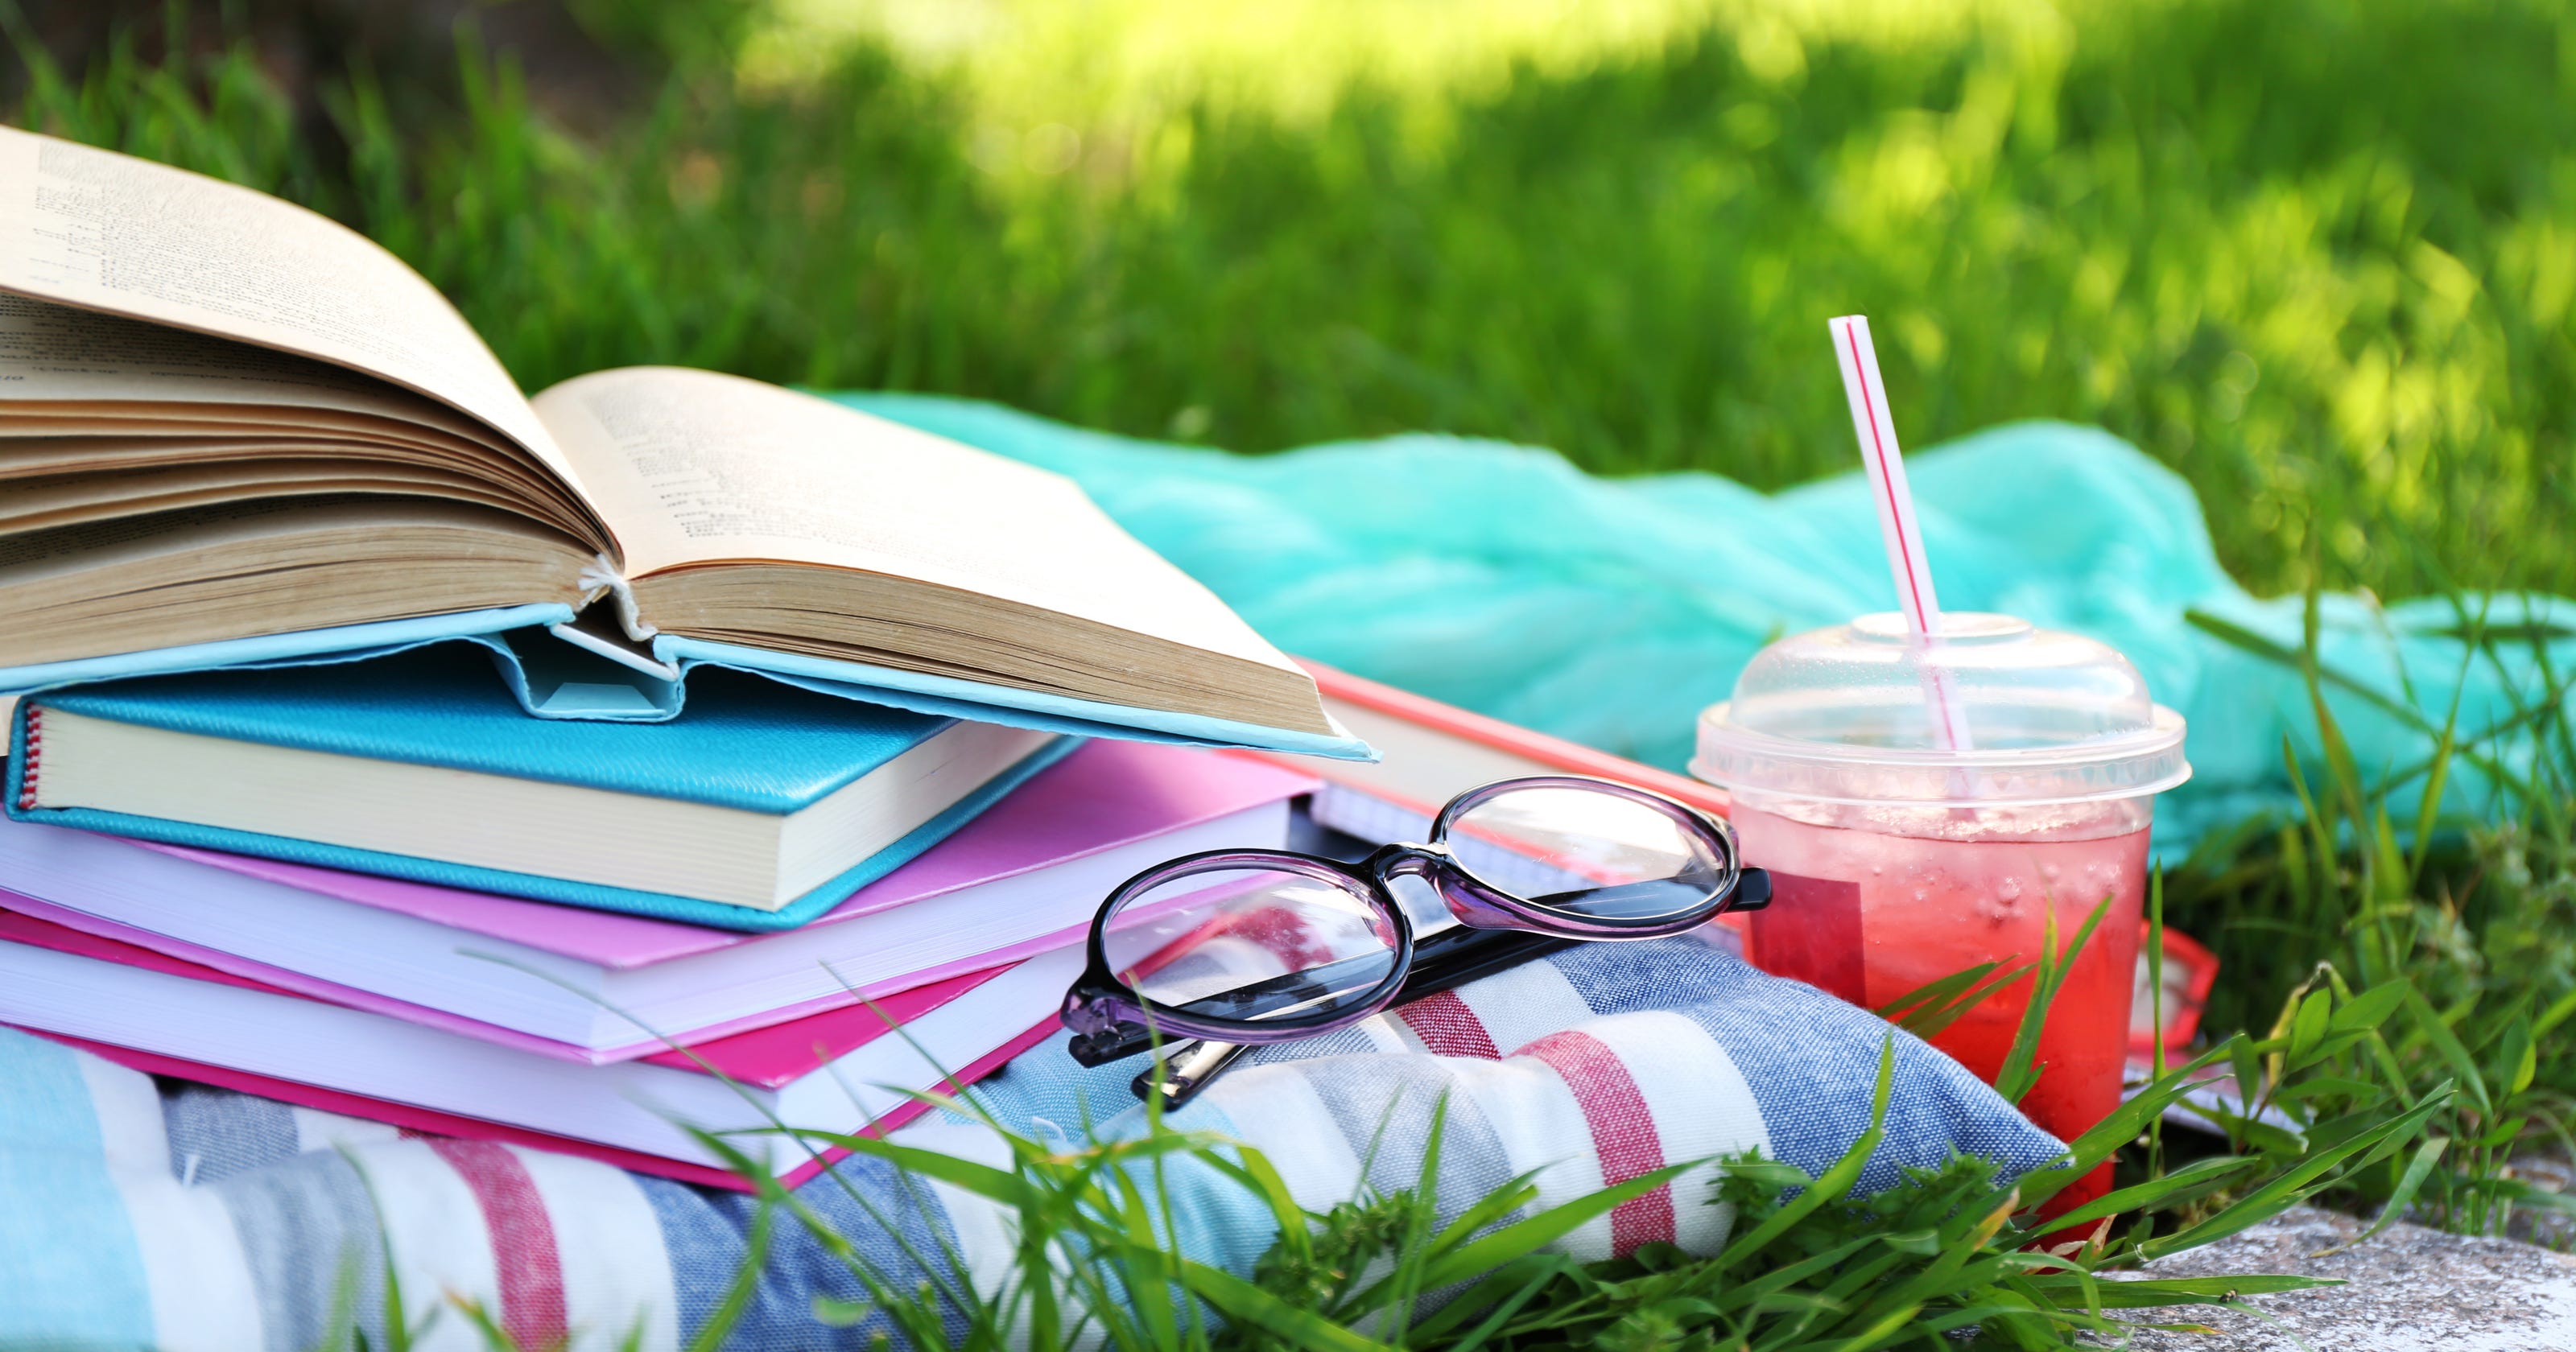 What's your summer reading list?